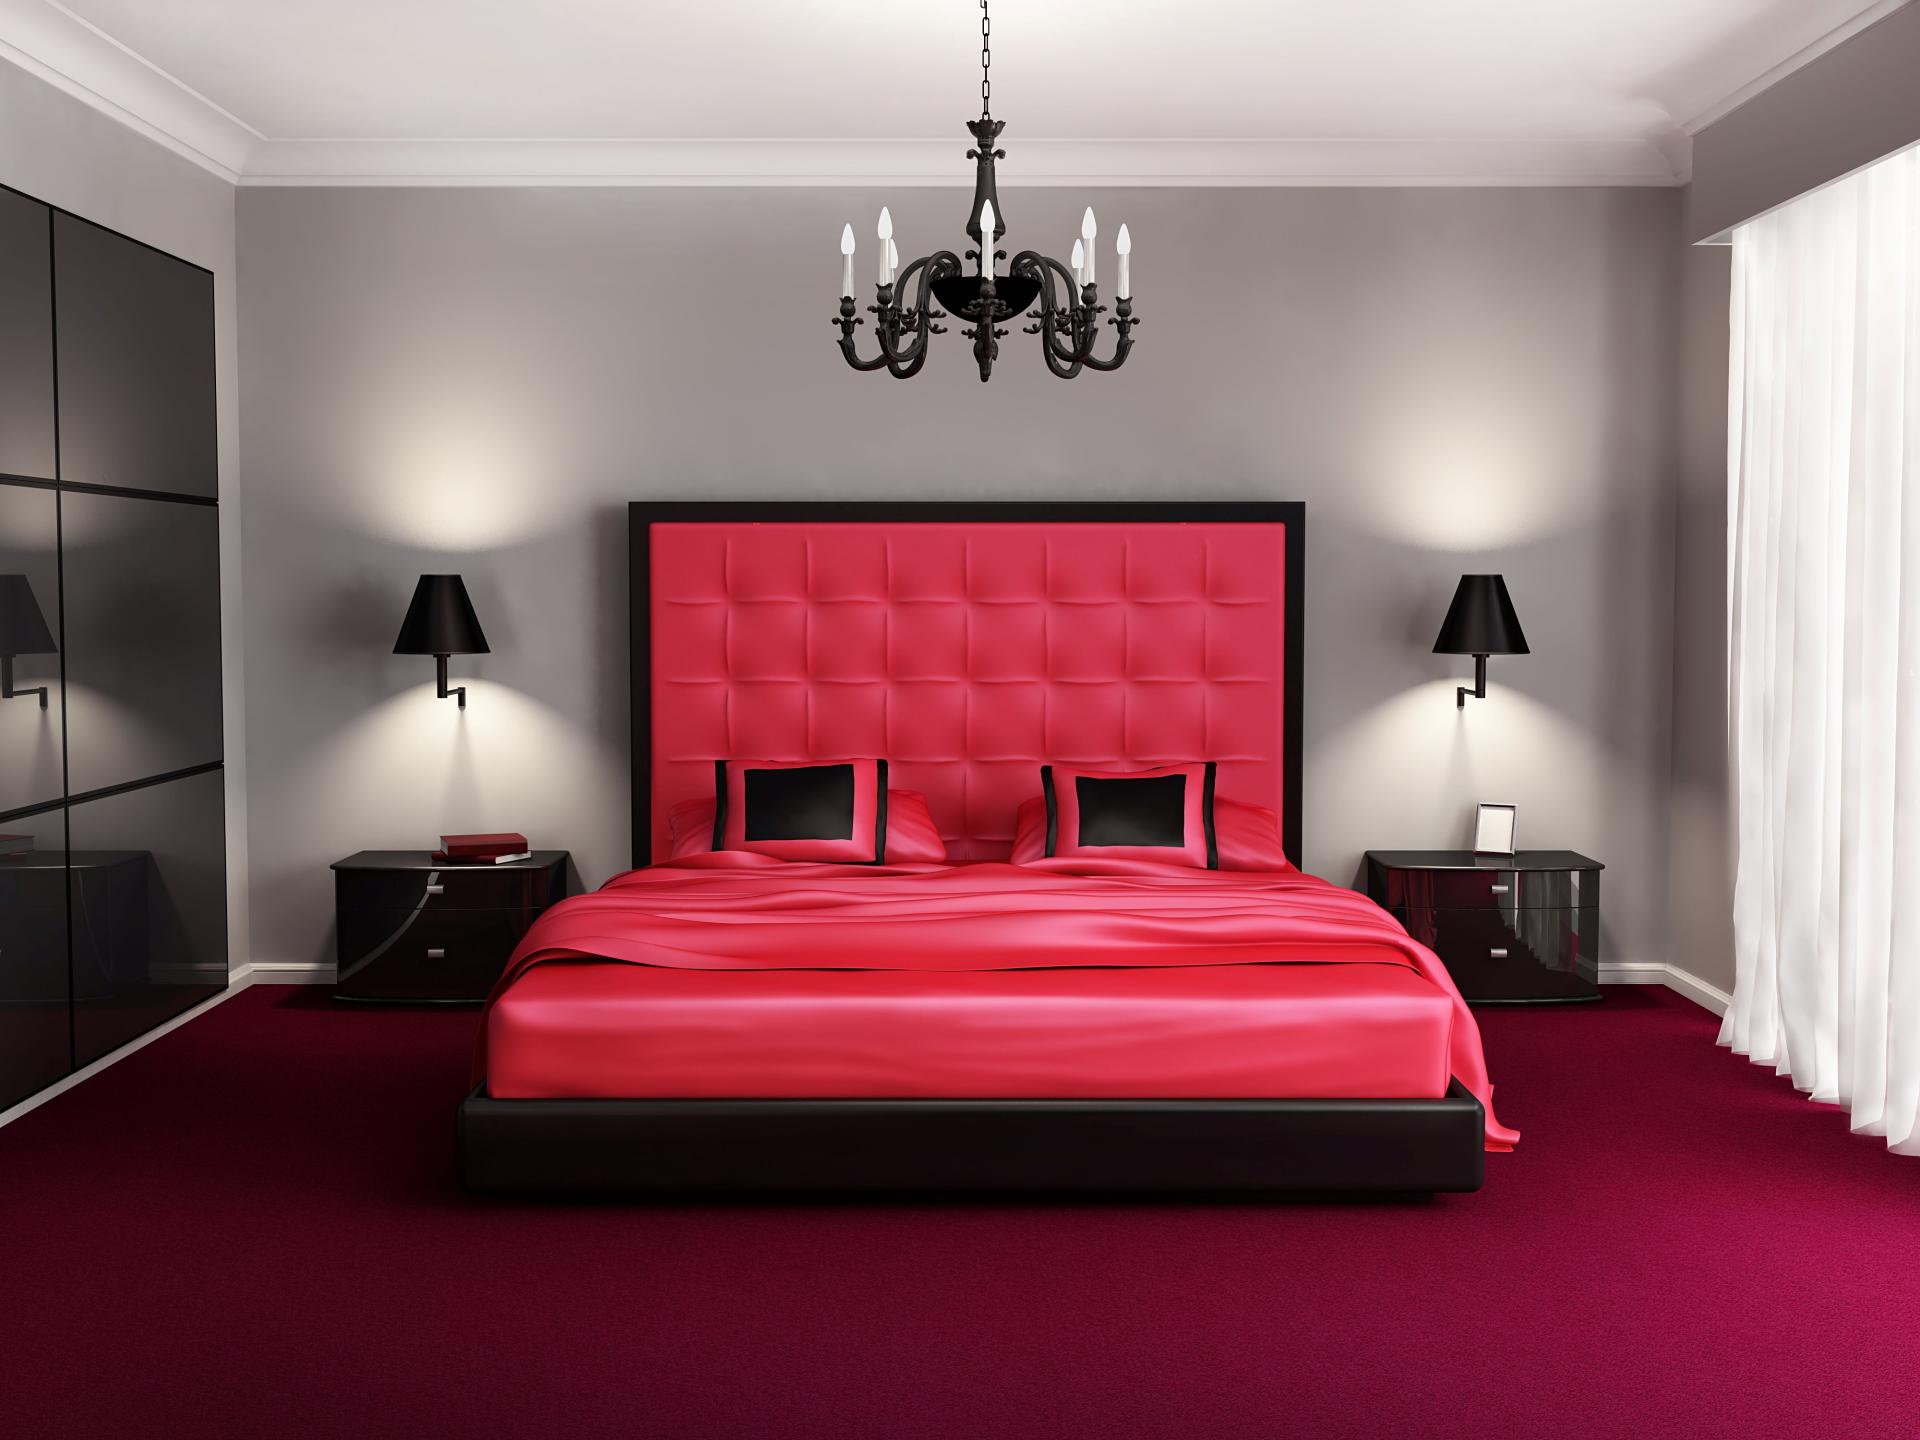 luxurious pink bed in a room with modern furnishings